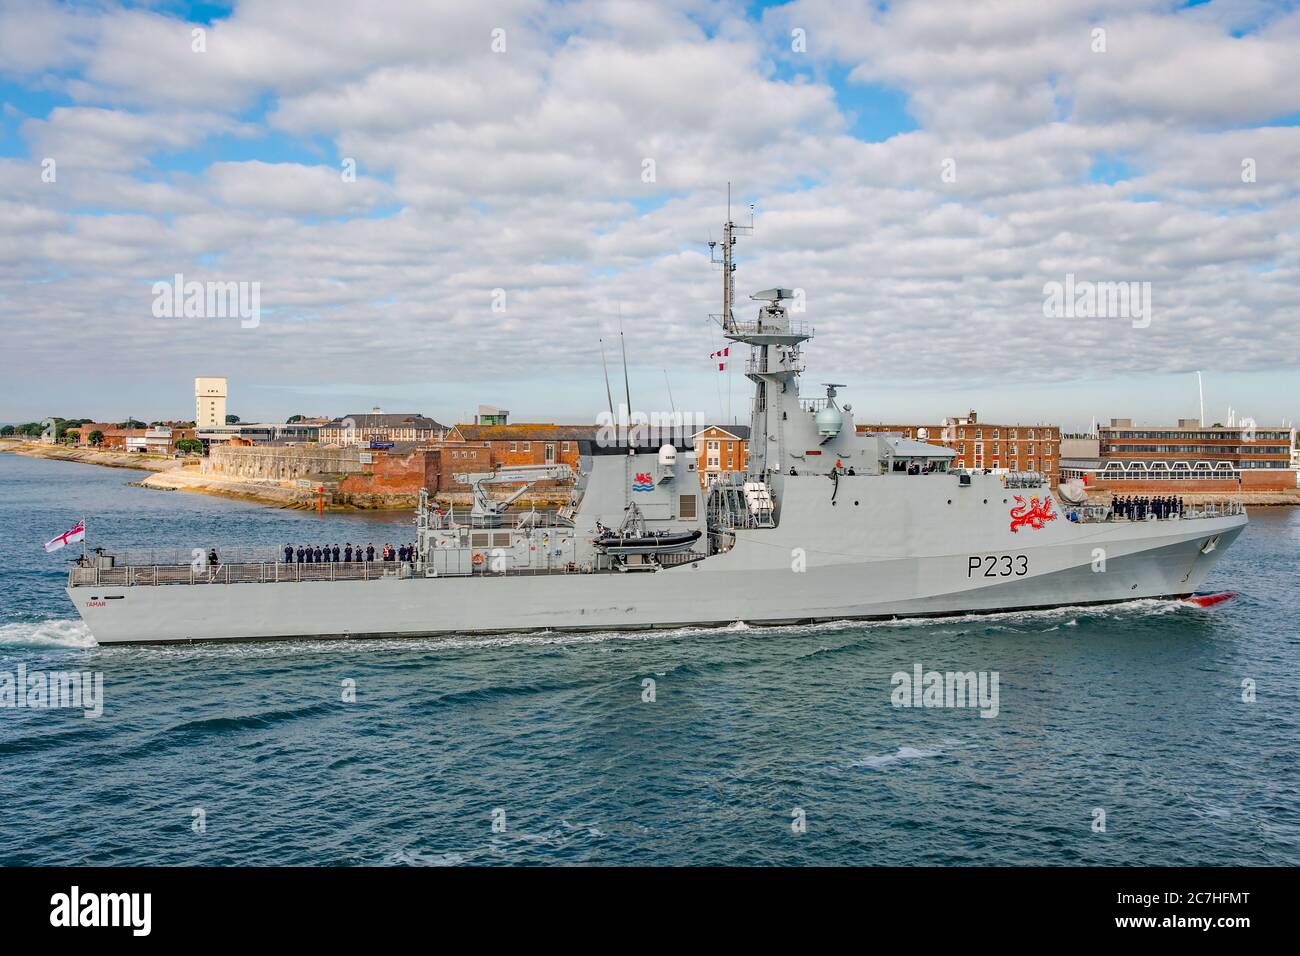 The Royal Navy Batch 2 River Class Offshore Patrol Vessel Hms Tamar P233 At Portsmouth Uk On The 17th July Stock Photo Alamy